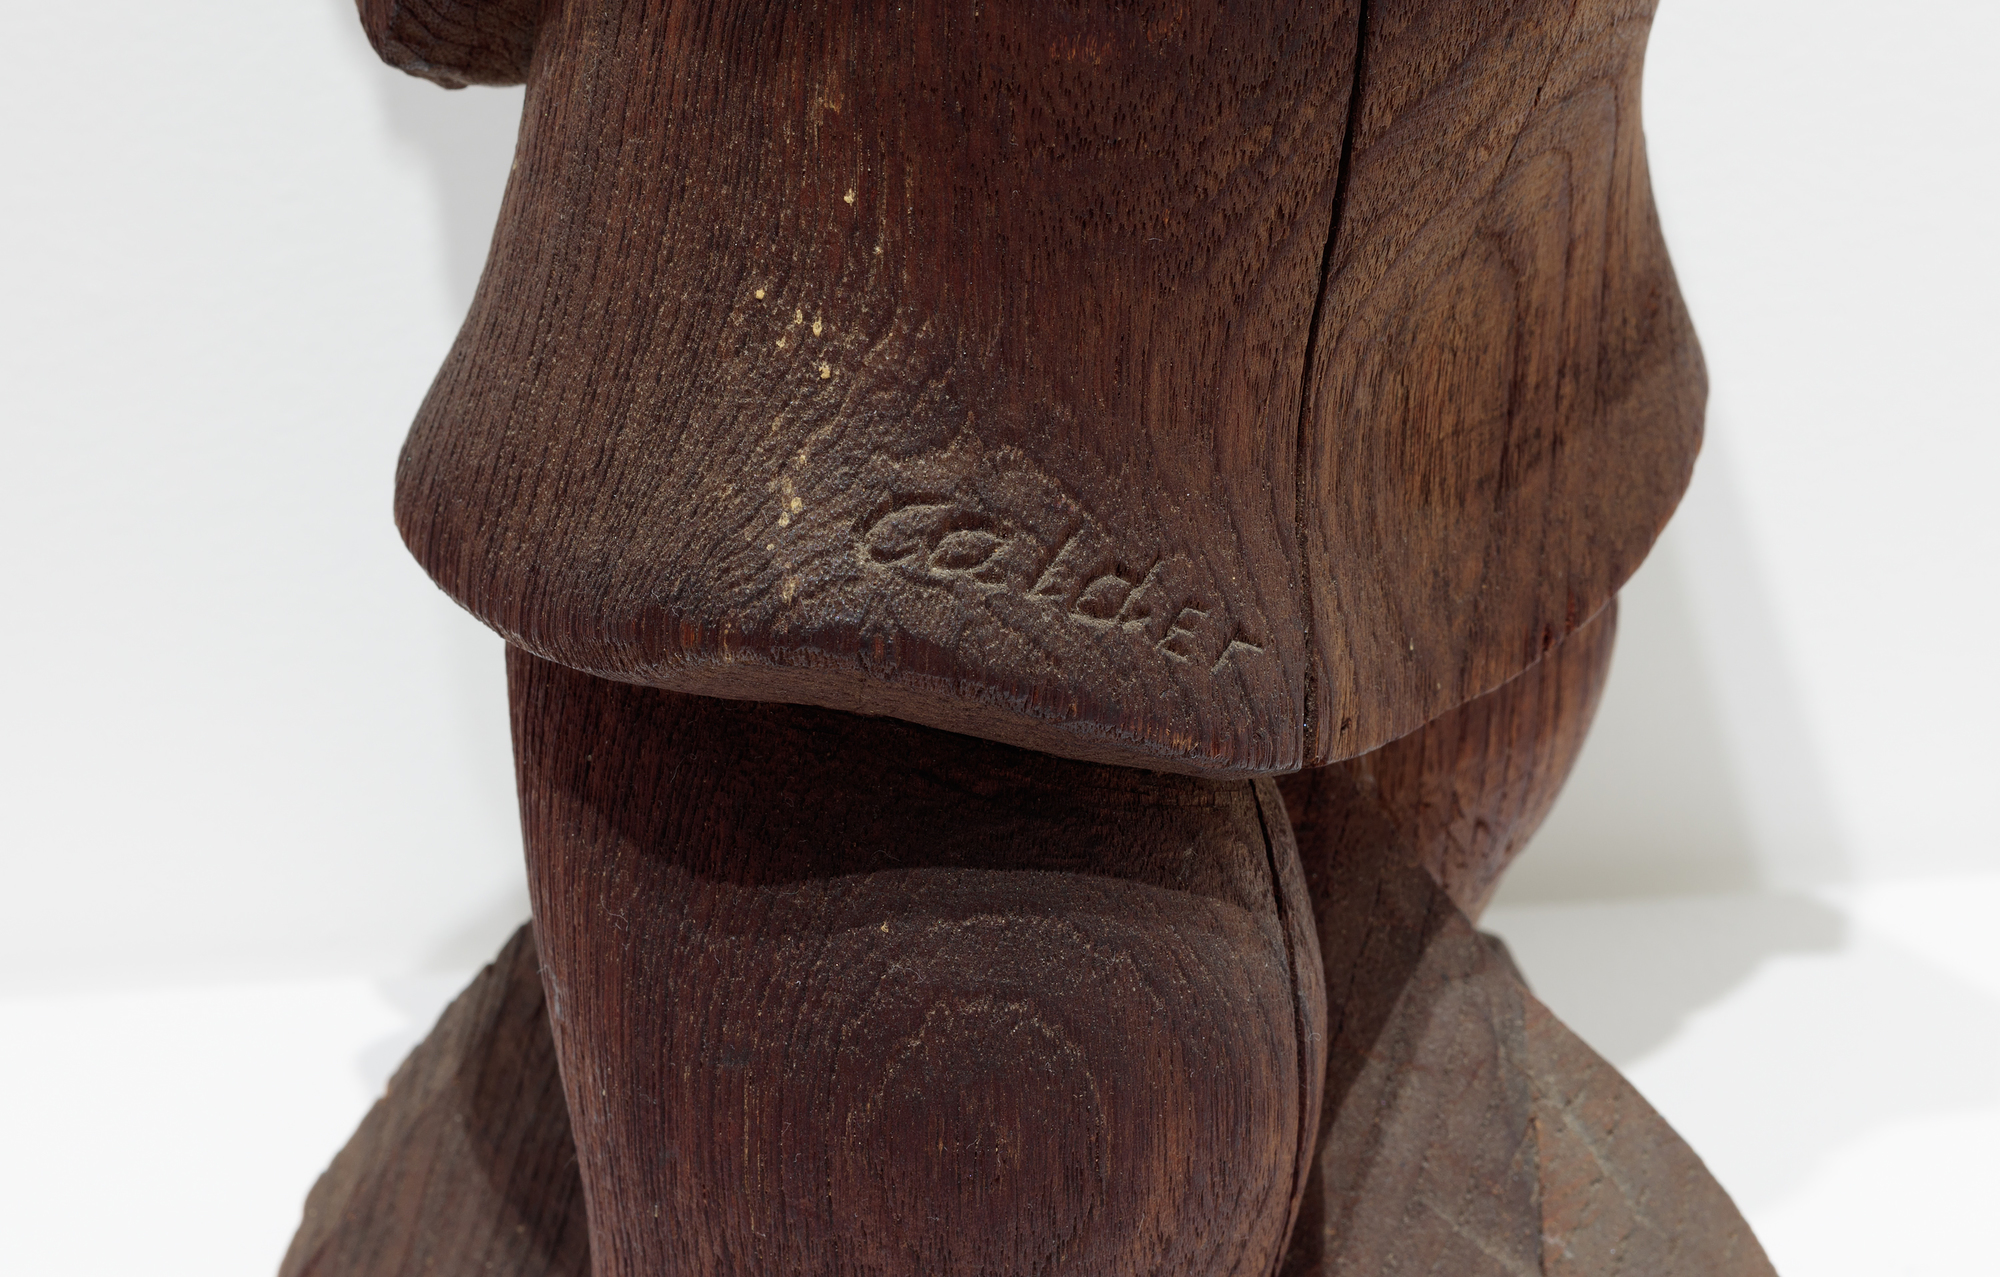 After disappointing sales at Weyhe Gallery in 1928, Calder turned from sculpted wire portraits and figures to the more conventional medium of wood. On the advice of sculptor Chaim Gross, he purchased small blocks of wood from Monteath, a Brooklyn supplier of tropical woods. He spent much of that summer on a Peekskill, New York farm carving. In each case, the woodblock suggested how he might preserve its overall shape and character as he subsumed those attributes in a single form.  There was a directness about working in wood that appealed to him. Carved from a single block of wood, Woman with Square Umbrella is not very different from the subjects of his wire sculptures except that he supplanted the ethereal nature of using wire with a more corporeal medium.
<br>© 2023 Calder Foundation, New York / Artists Rights Society (ARS), New York